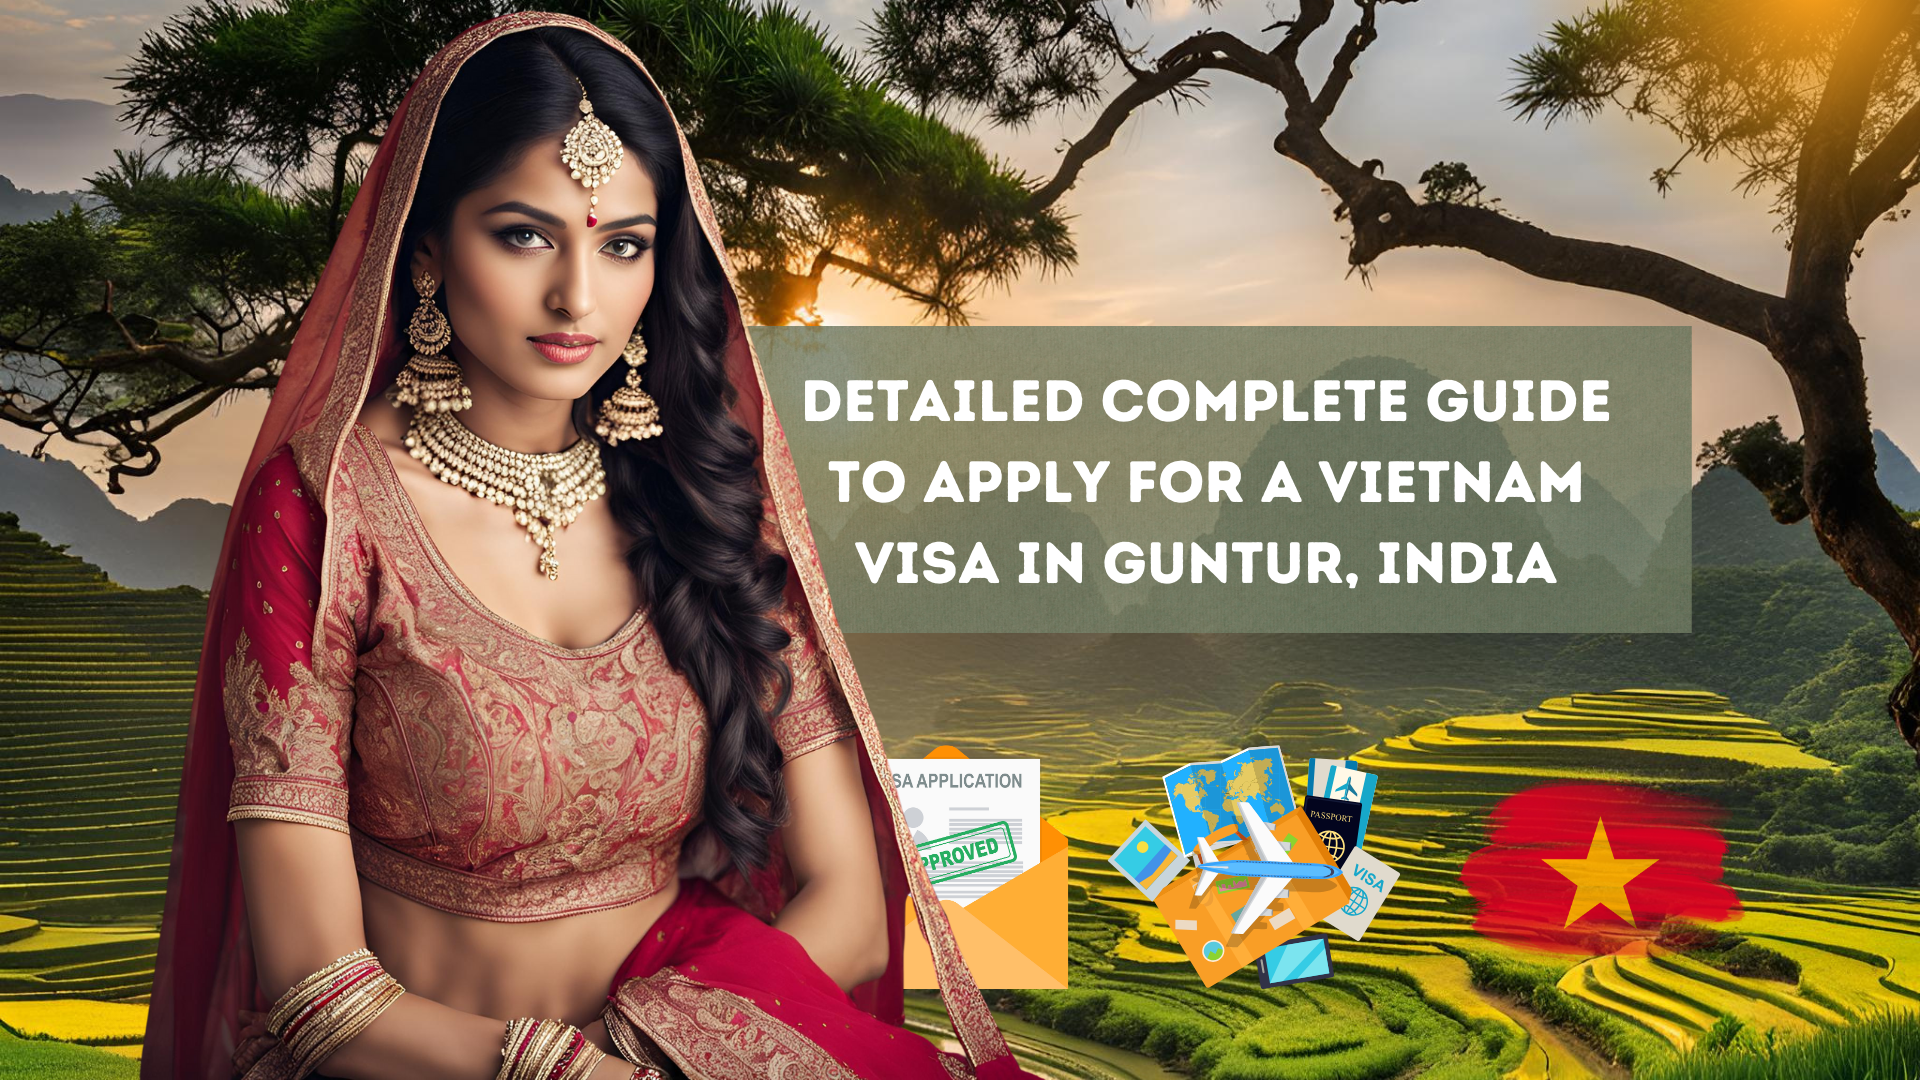 Detailed Complete Guide to Apply for a Vietnam Visa in Guntur, India